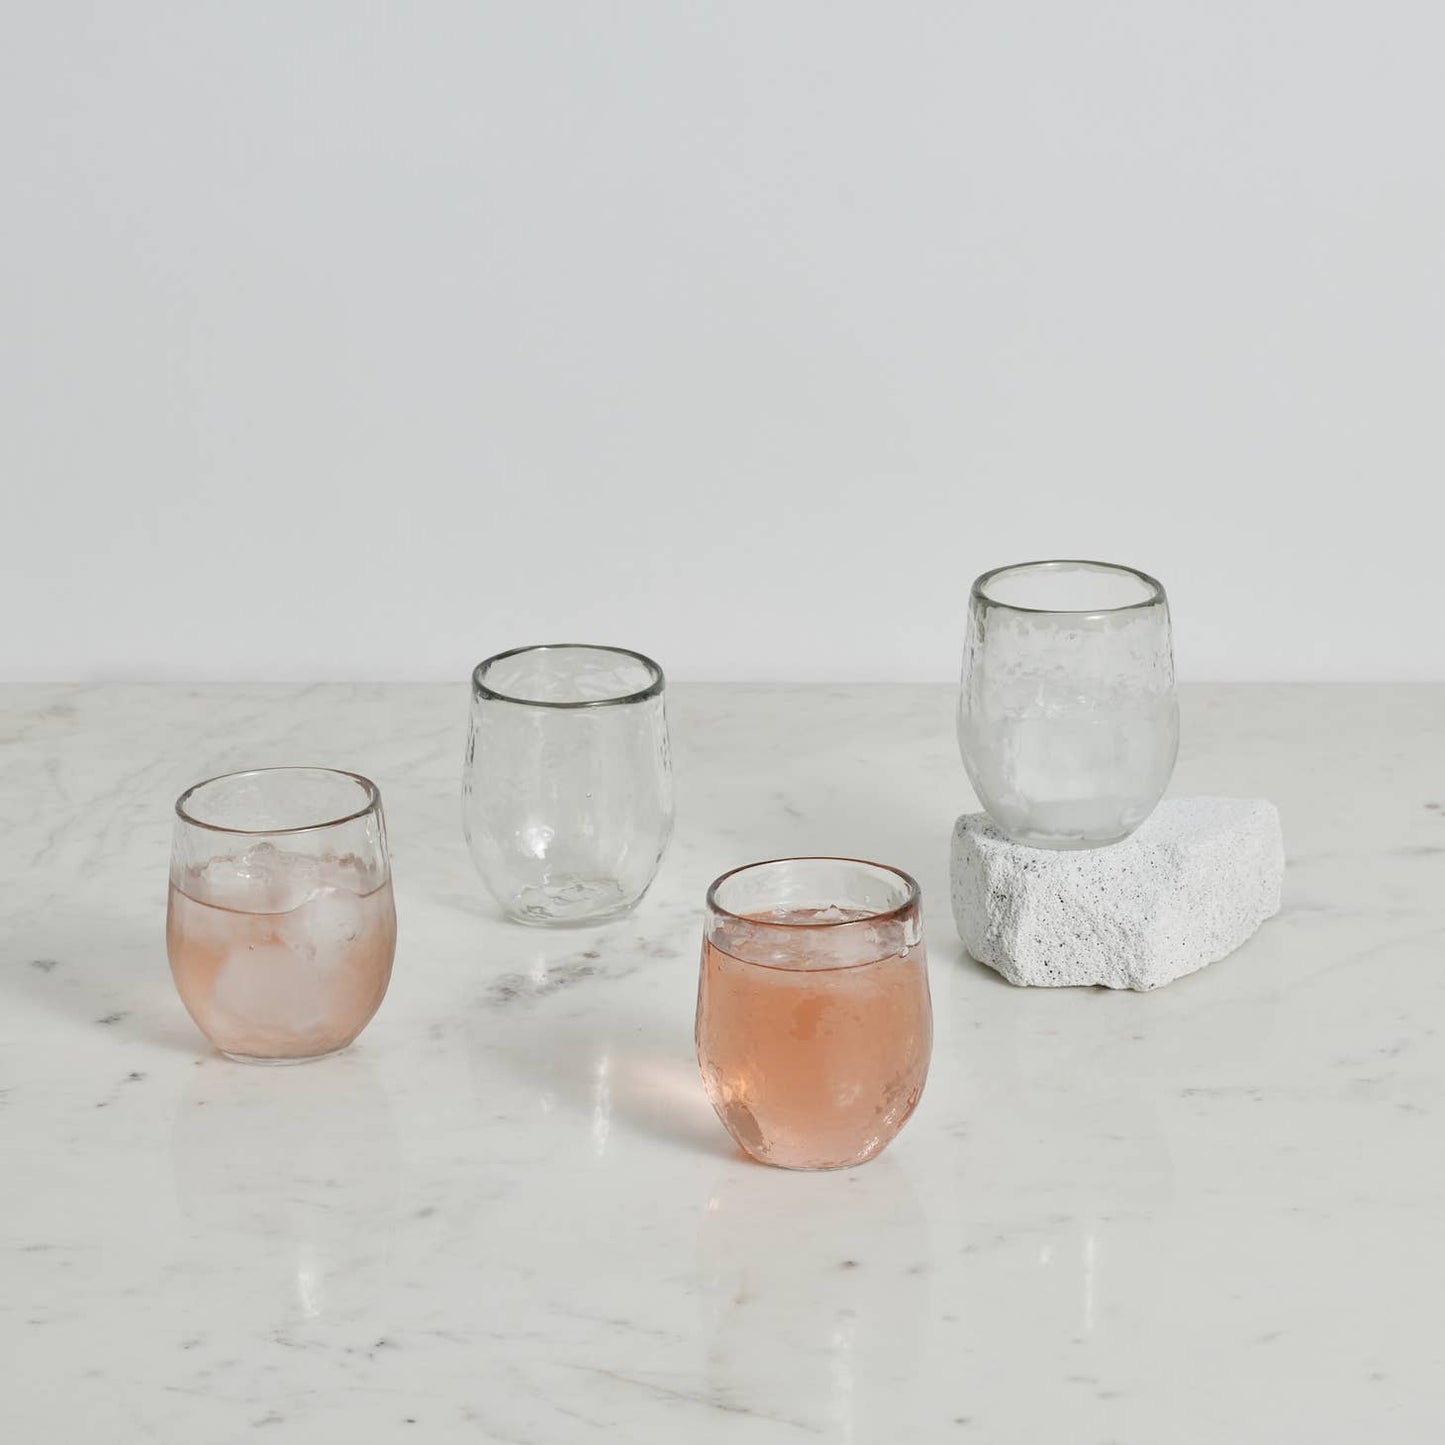 Whether used for a special aperitif or for your daily juice, the versatile 7 oz. Spirits glass will soon become family favorites. This subtly hammered clear glassware is finished with a hand polish that highlights its texture. Ethically made in India.